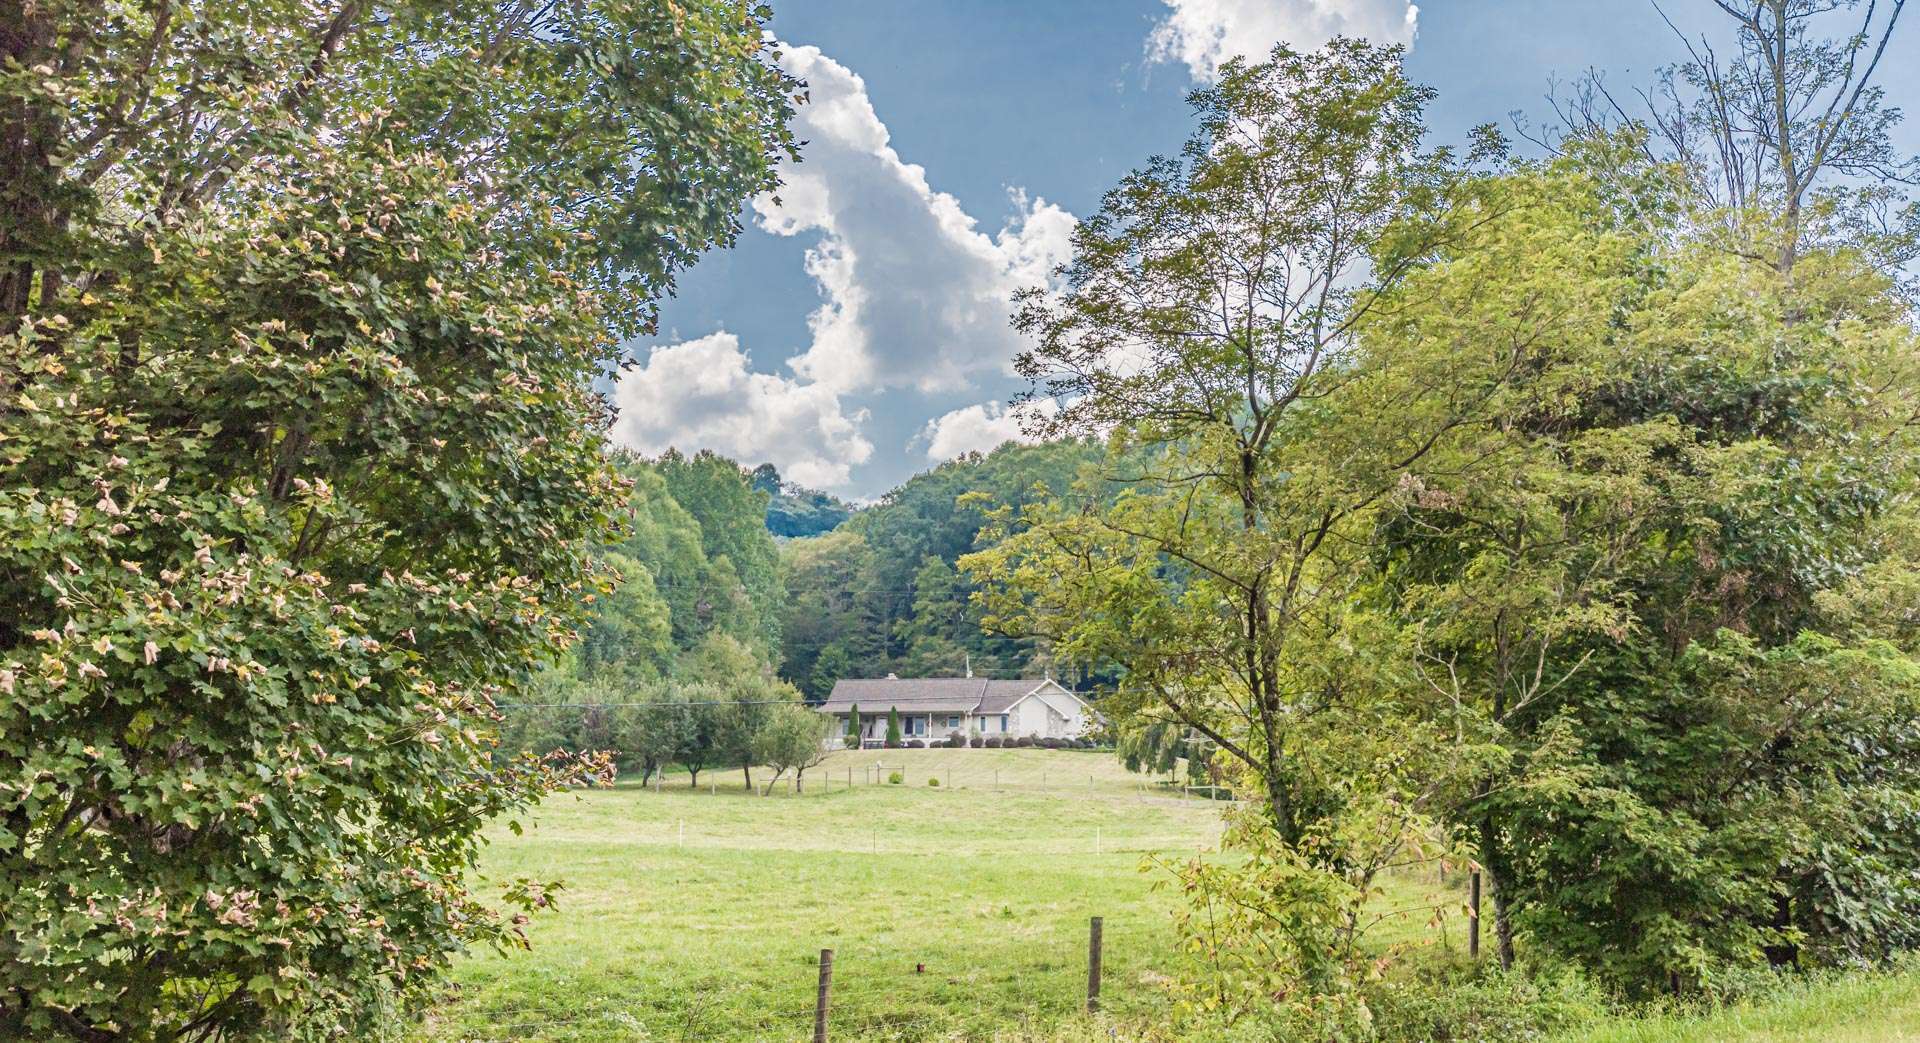 Driving up Little Windfall road, the 3-bedroom, 2-bath home can be seen from across the pasture.